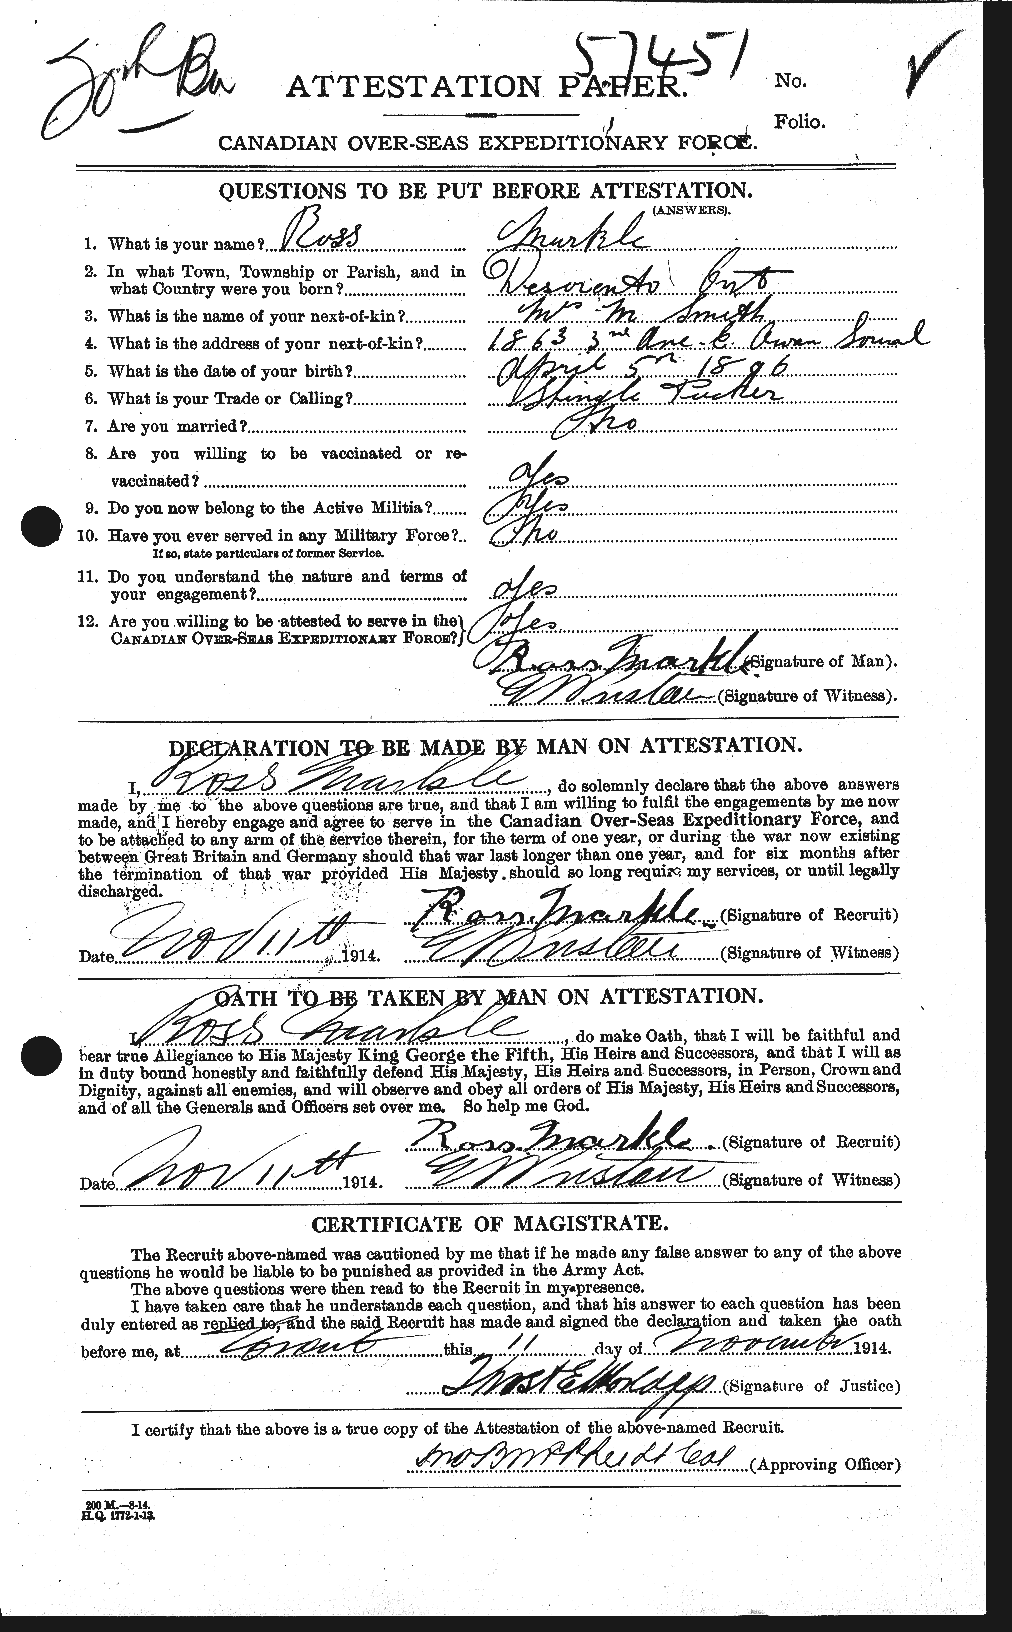 Personnel Records of the First World War - CEF 479288a